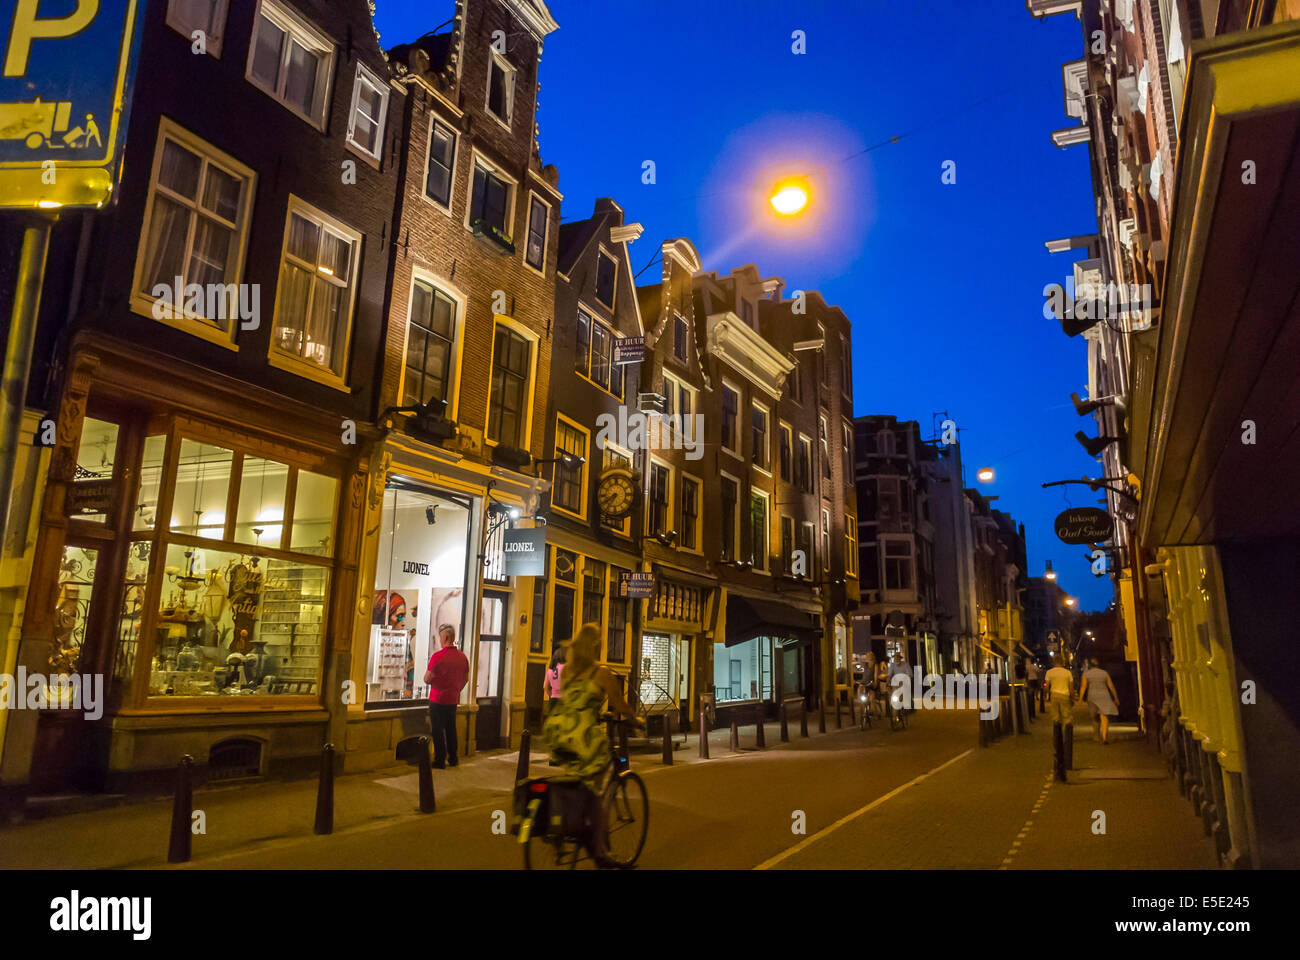 amsterdam, Holland,  The Netherlands, Street Scene at night with lighting, Local neighbourhoods, Row shops fronts Stock Photo